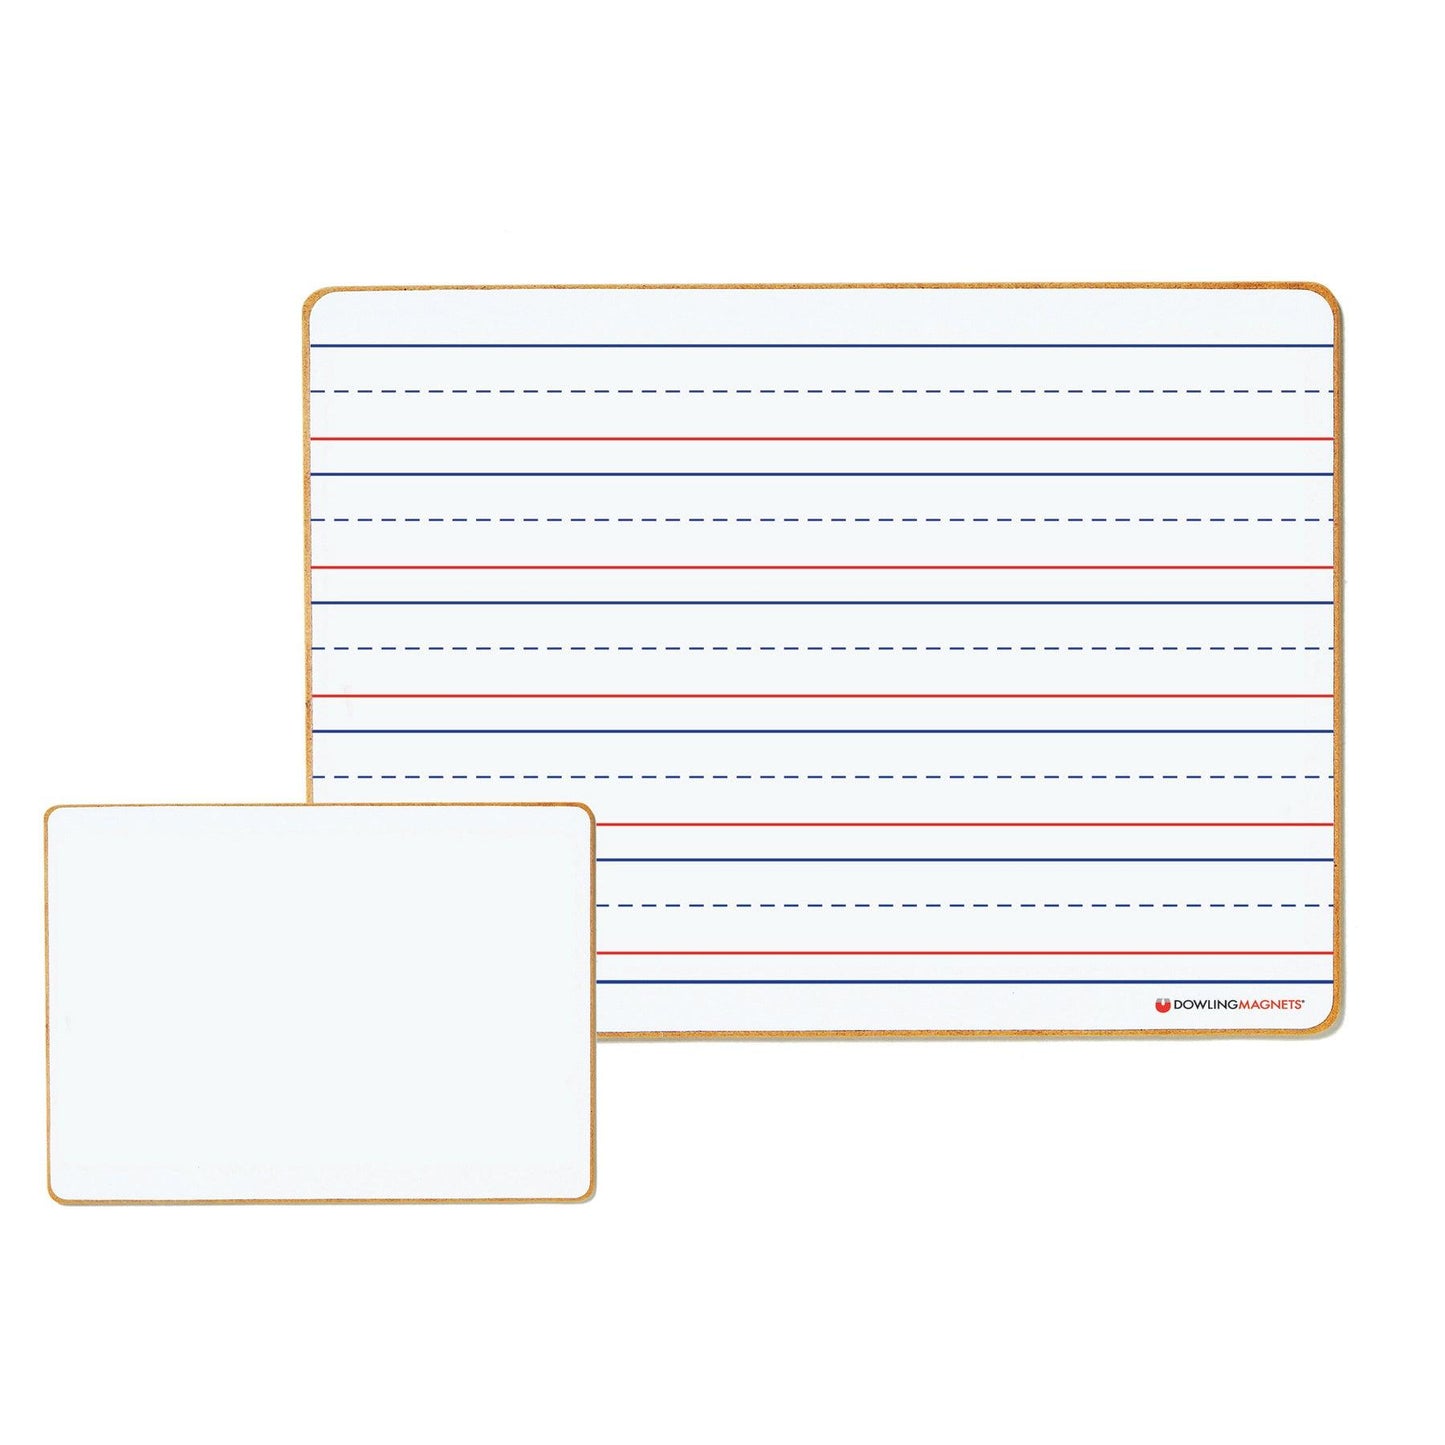 Double-sided Magnetic Dry-Erase Board, Line-Ruled/Blank, Pack of 6 - Loomini